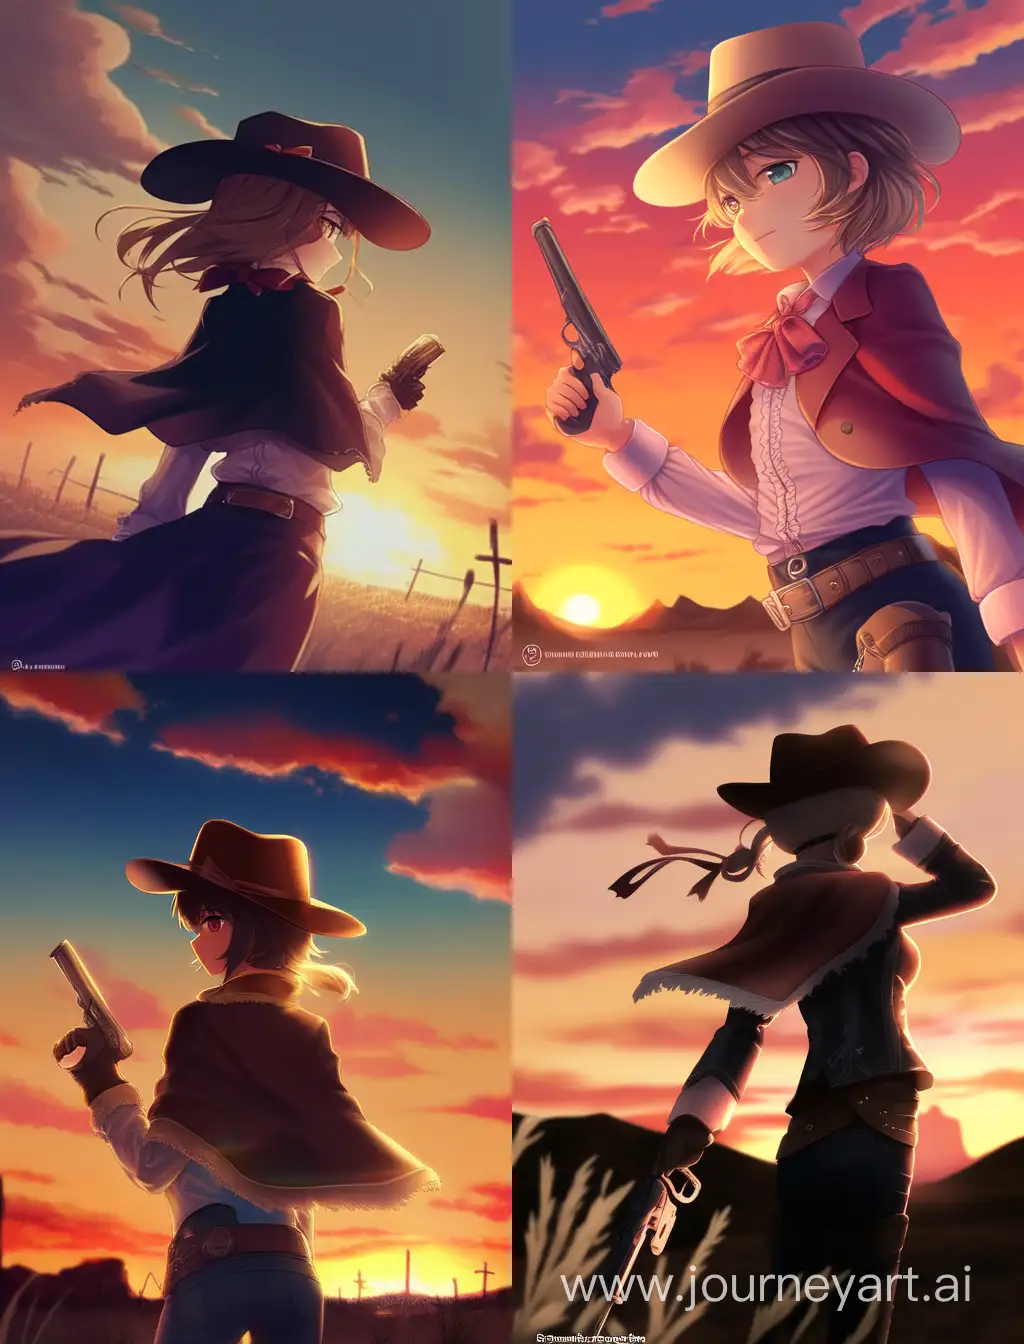 gunslinger girl in cowboy clothes wearing a hat and leather jacket, holding old revolve in a sunset old west landscape